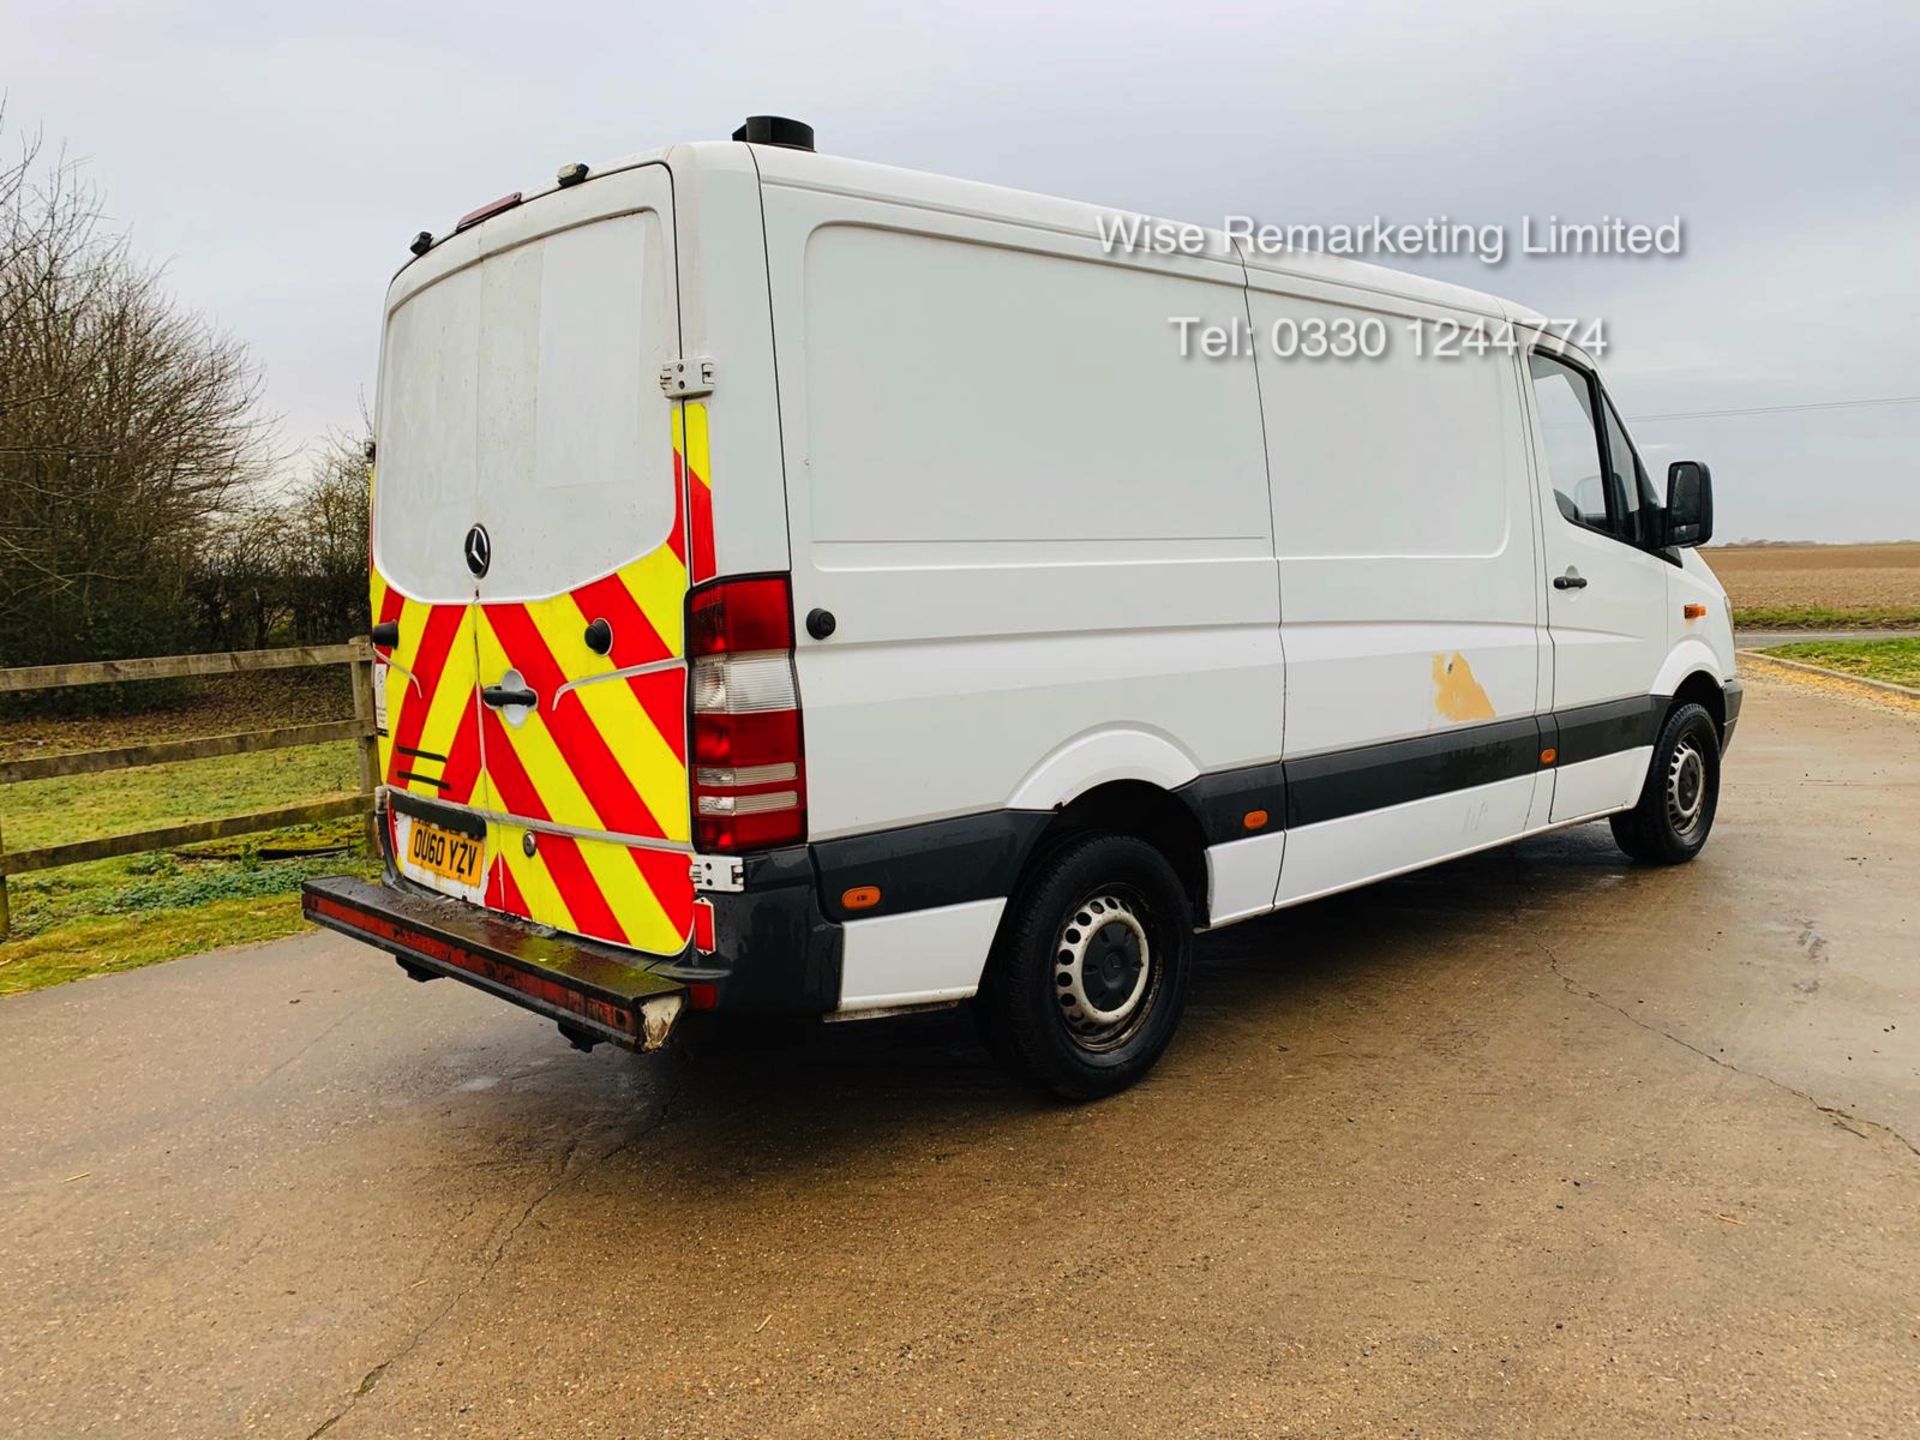 Mercedes Sprinter 313 2.1 CDI *Automatic Triptronic Gearbox* - 2011 Model - Ply Lined - Image 5 of 15